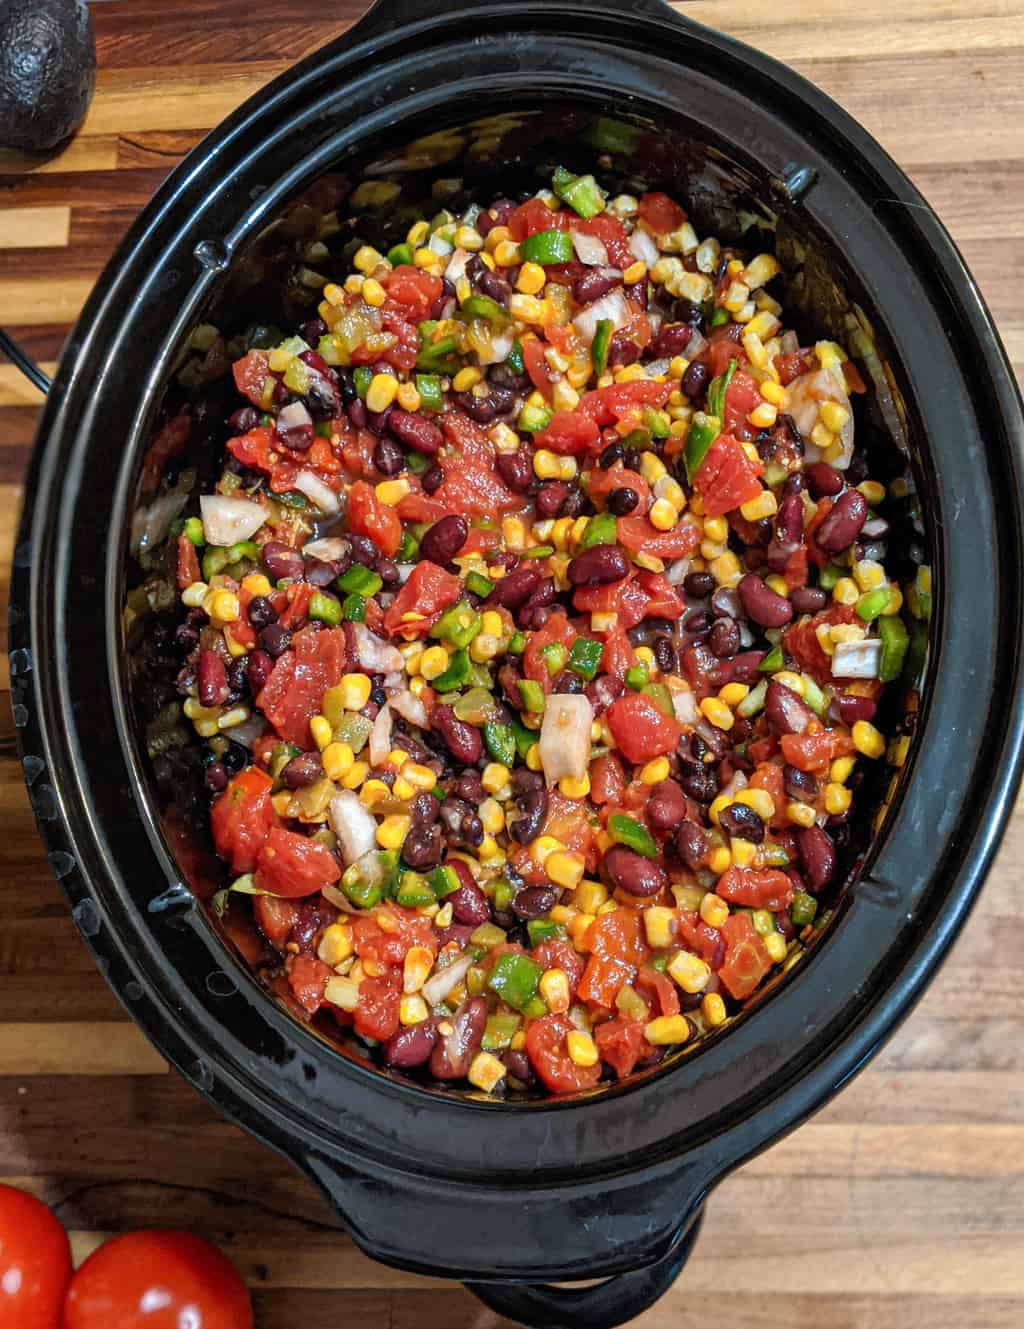 Slow Cooker 2 Bean Chili - Haller Health and Wellness